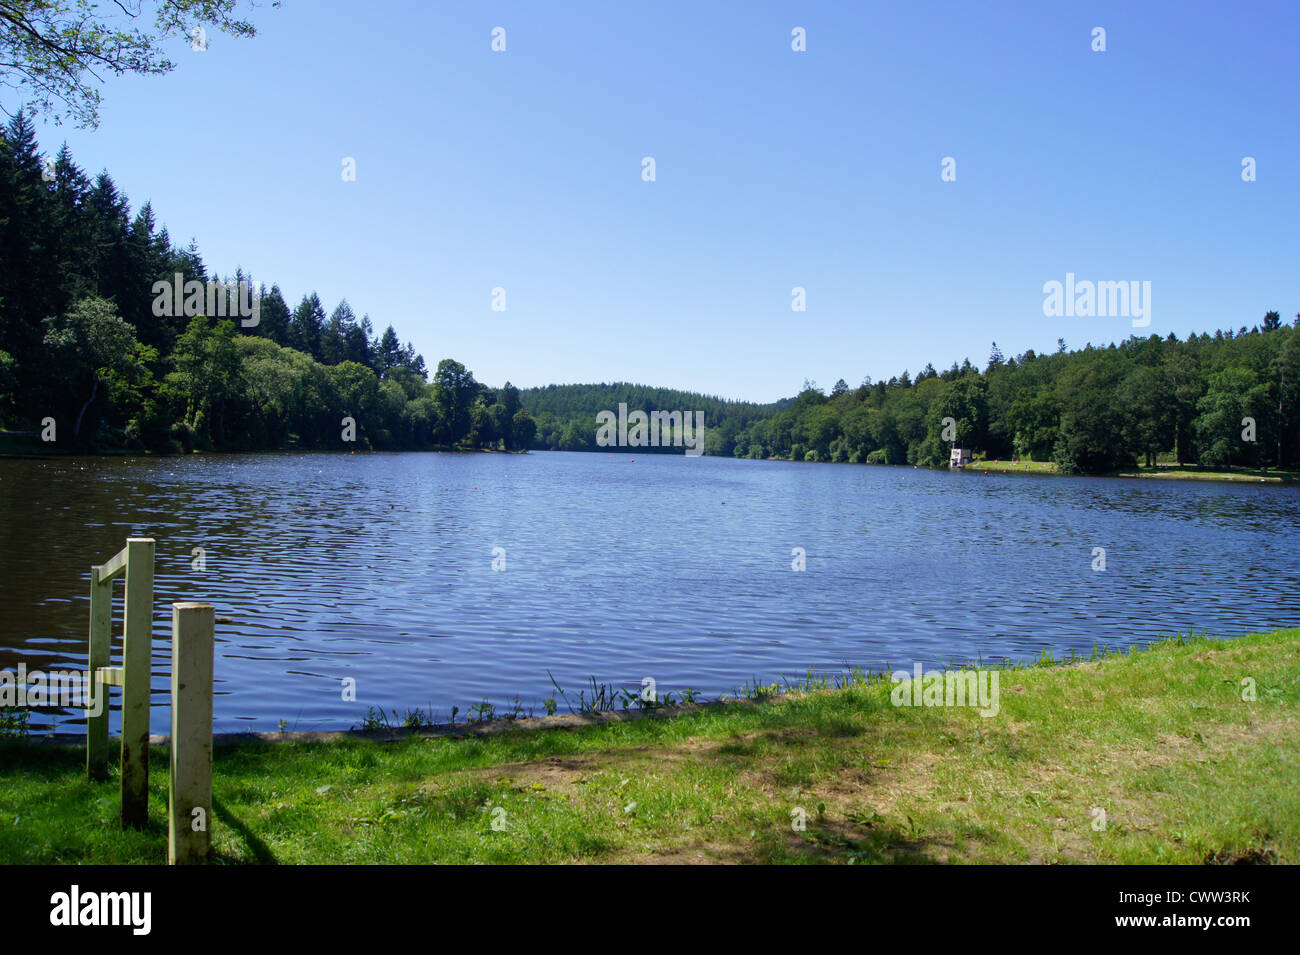 A nice shot of Shearwater lake which is part of the Longleat Estate in Wiltshire. Stock Photo